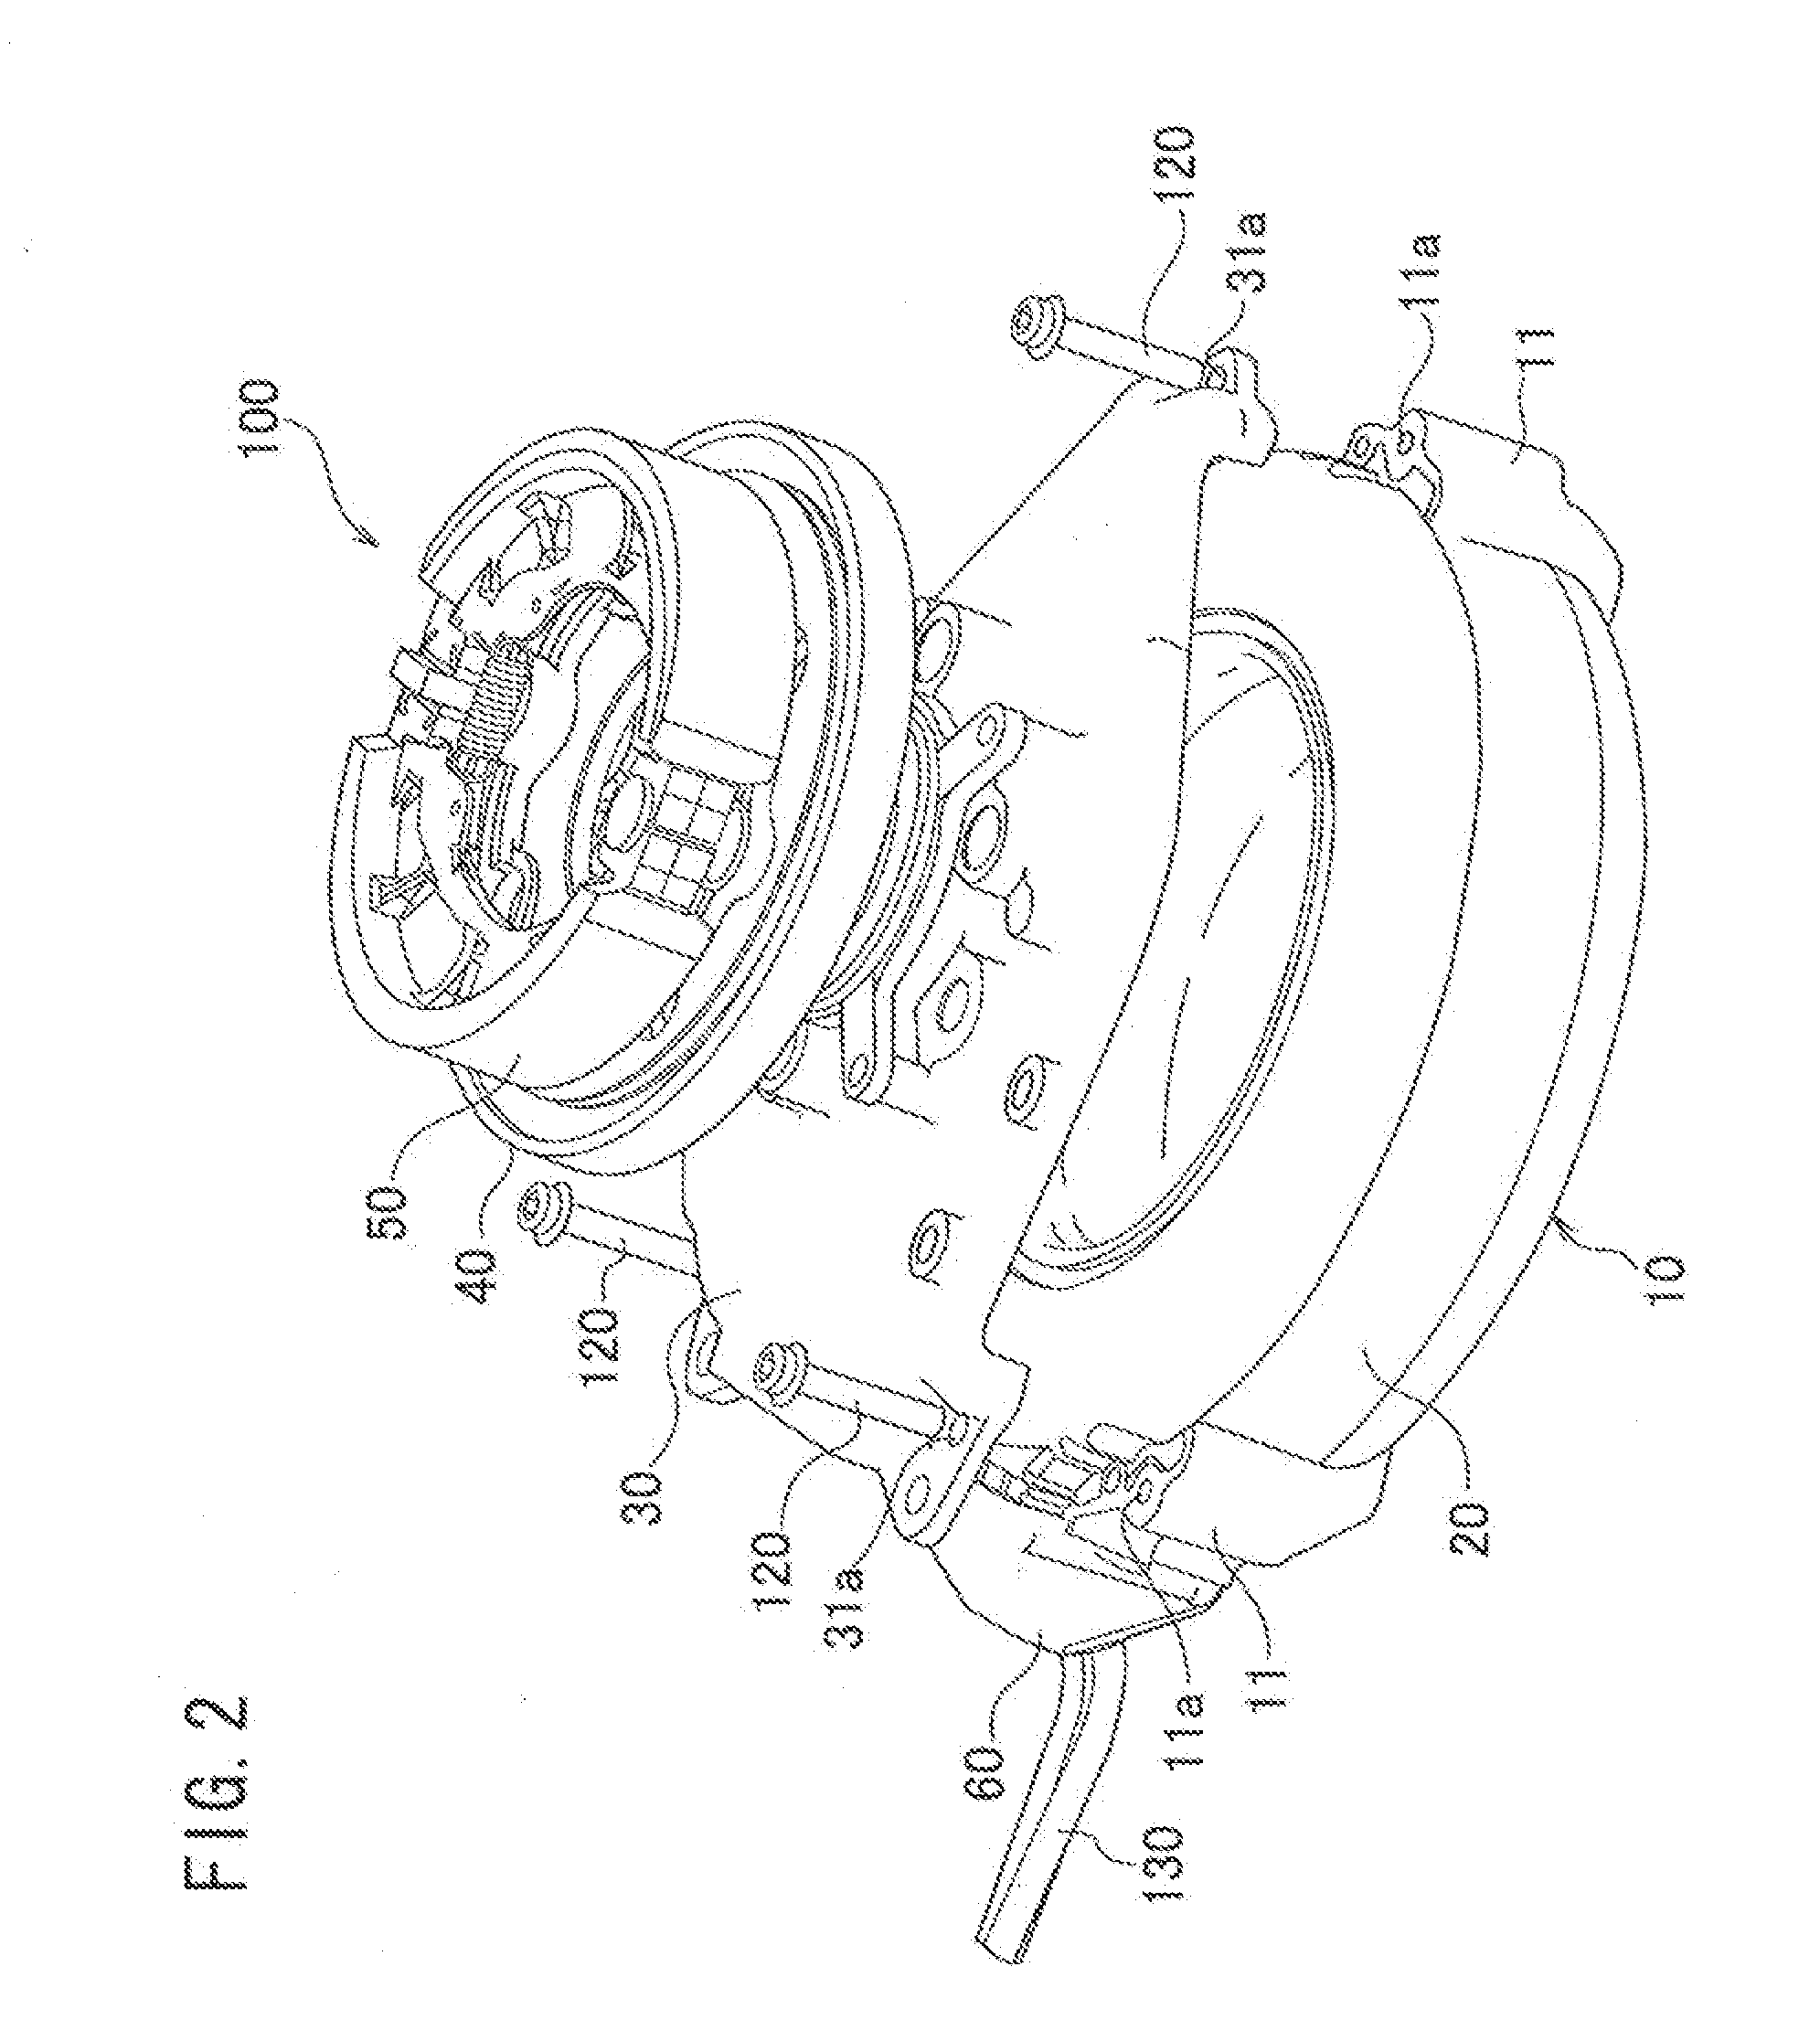 Electric motor and electric vehicle